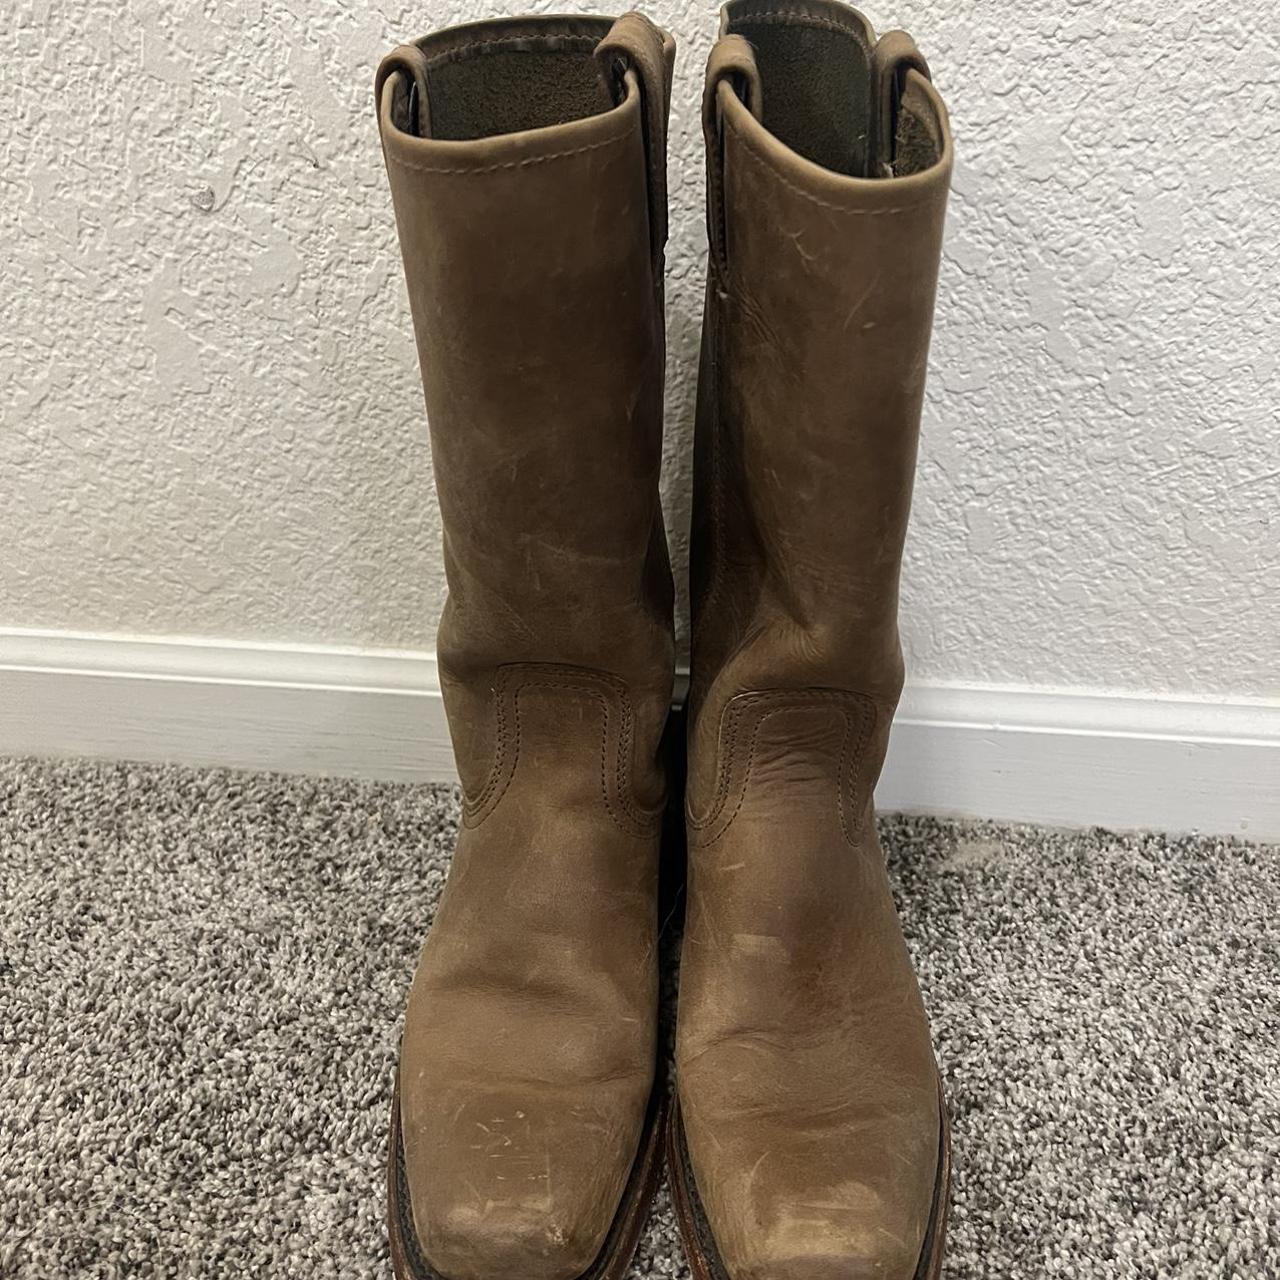 Frye Women's Tan and Brown Boots